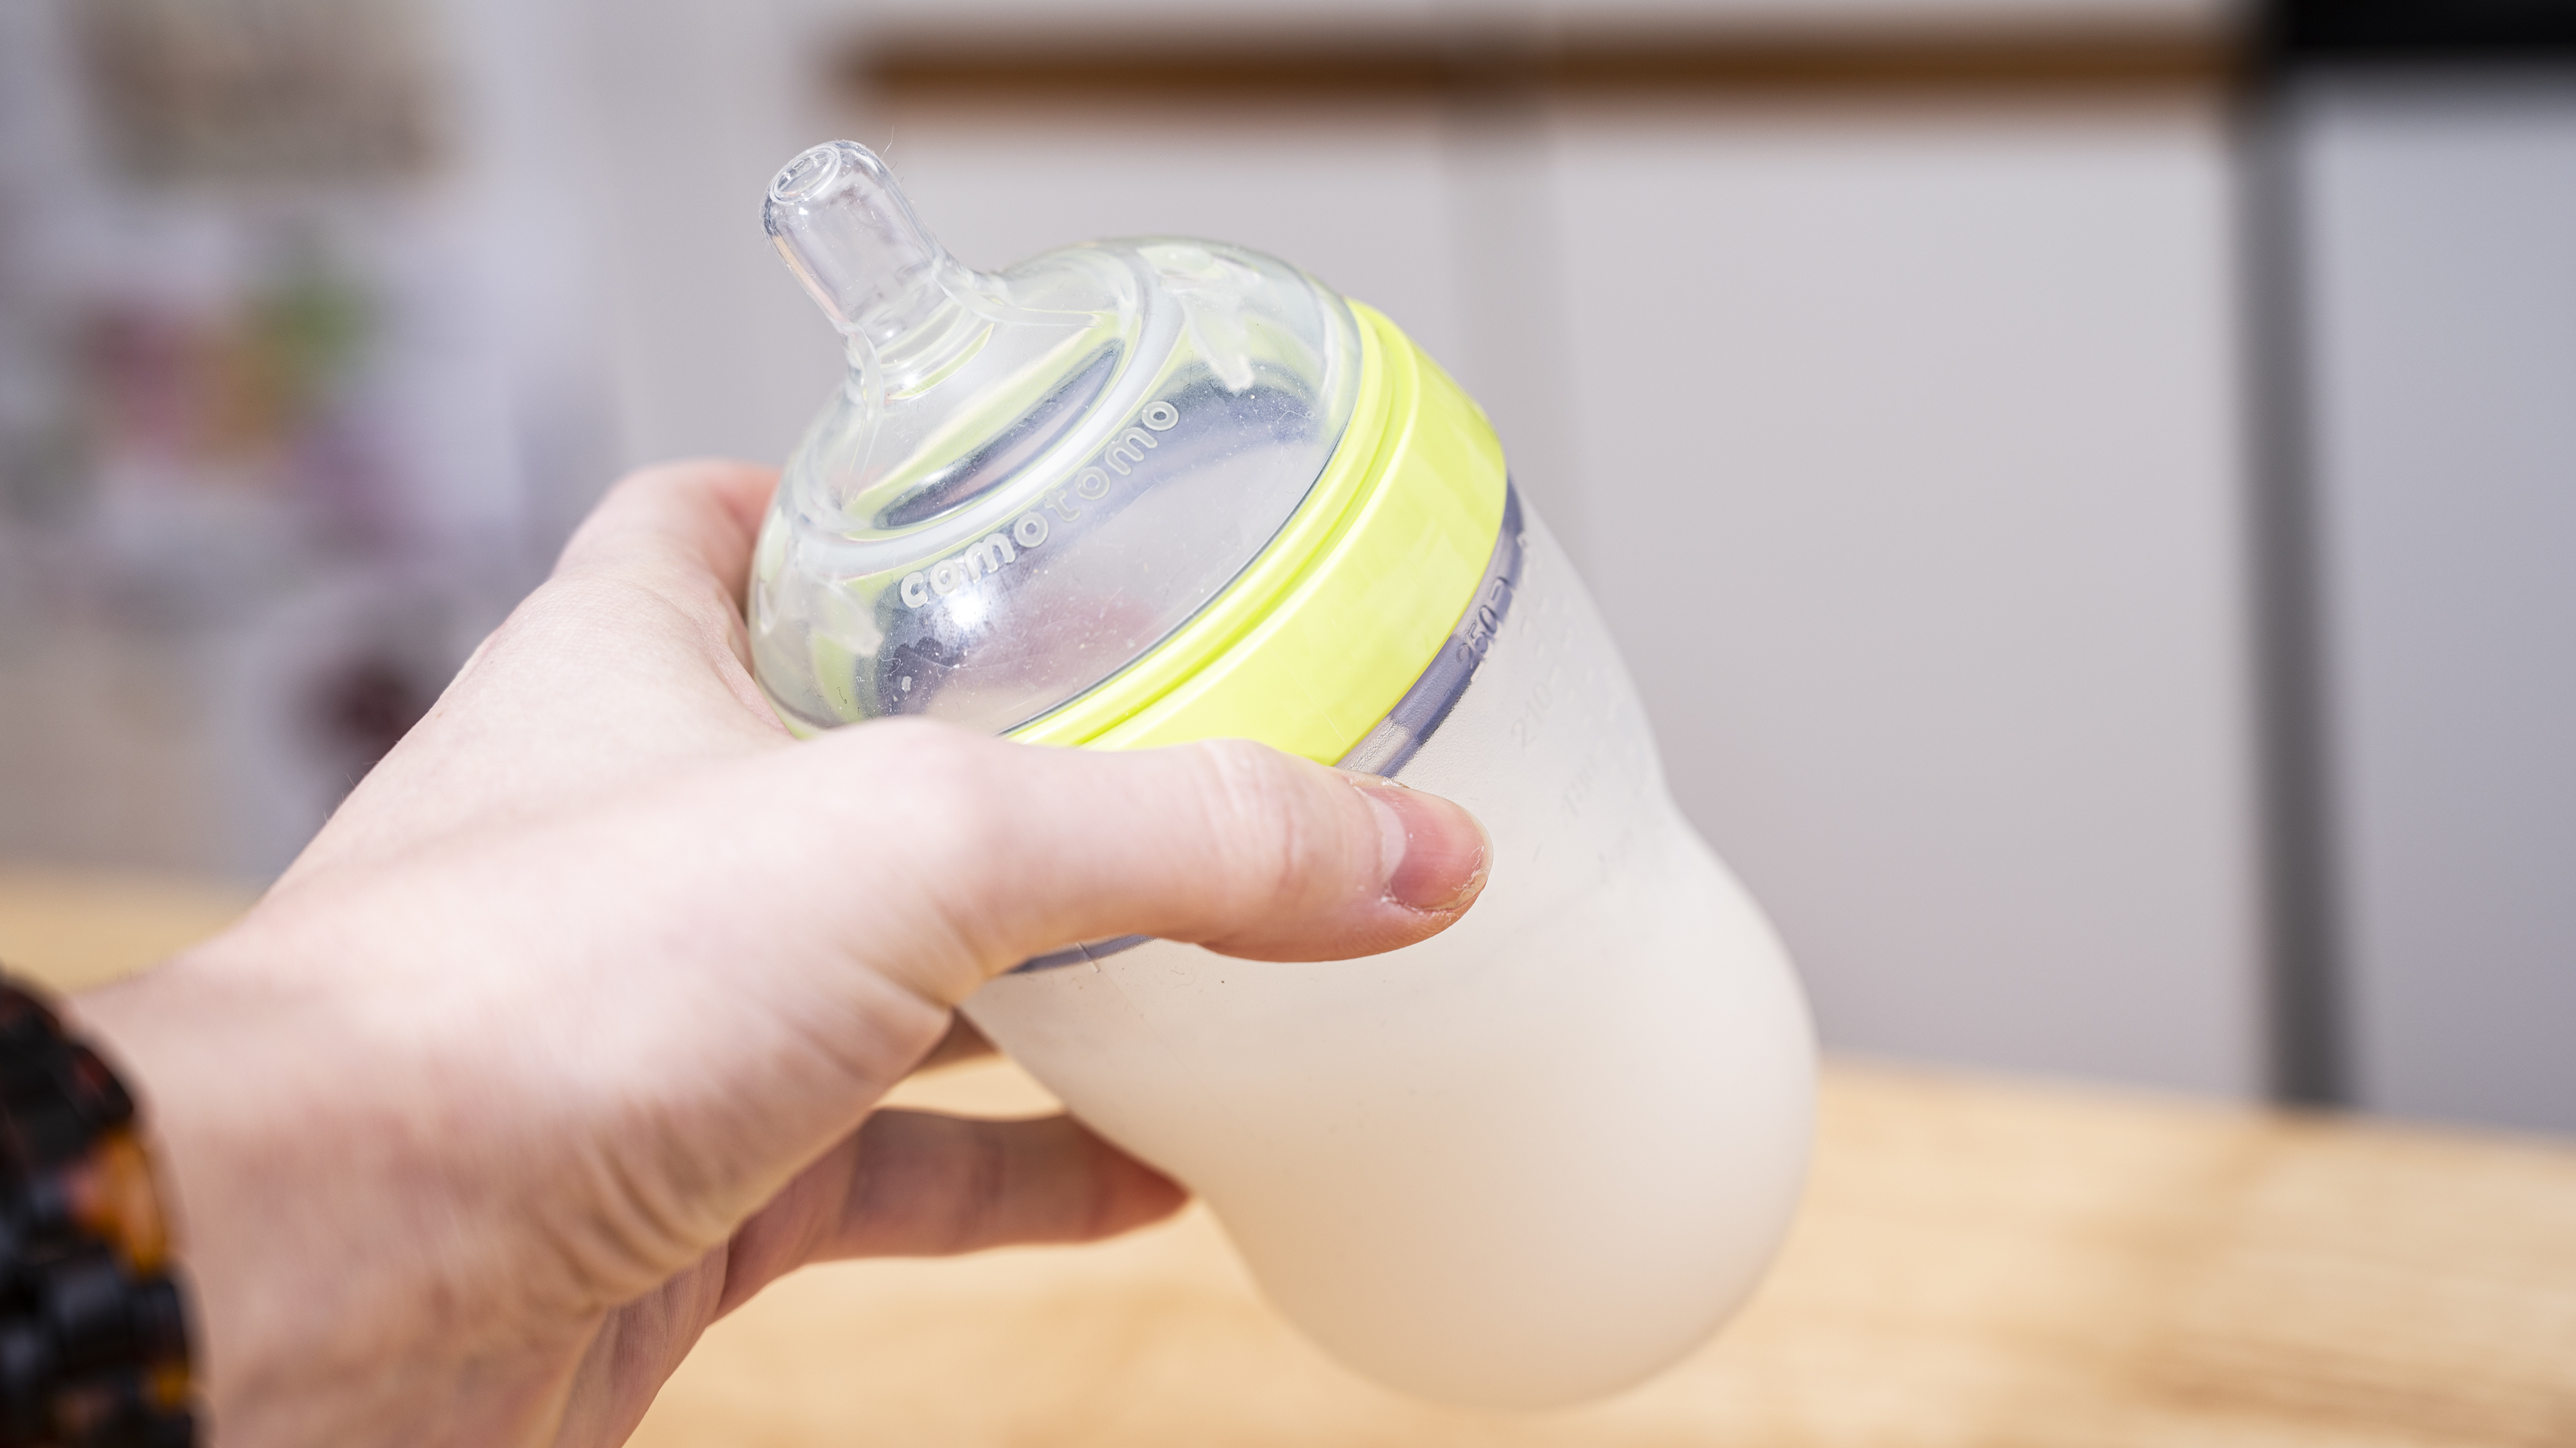 The Comotomo bottle is our favorite of the ones we tested.